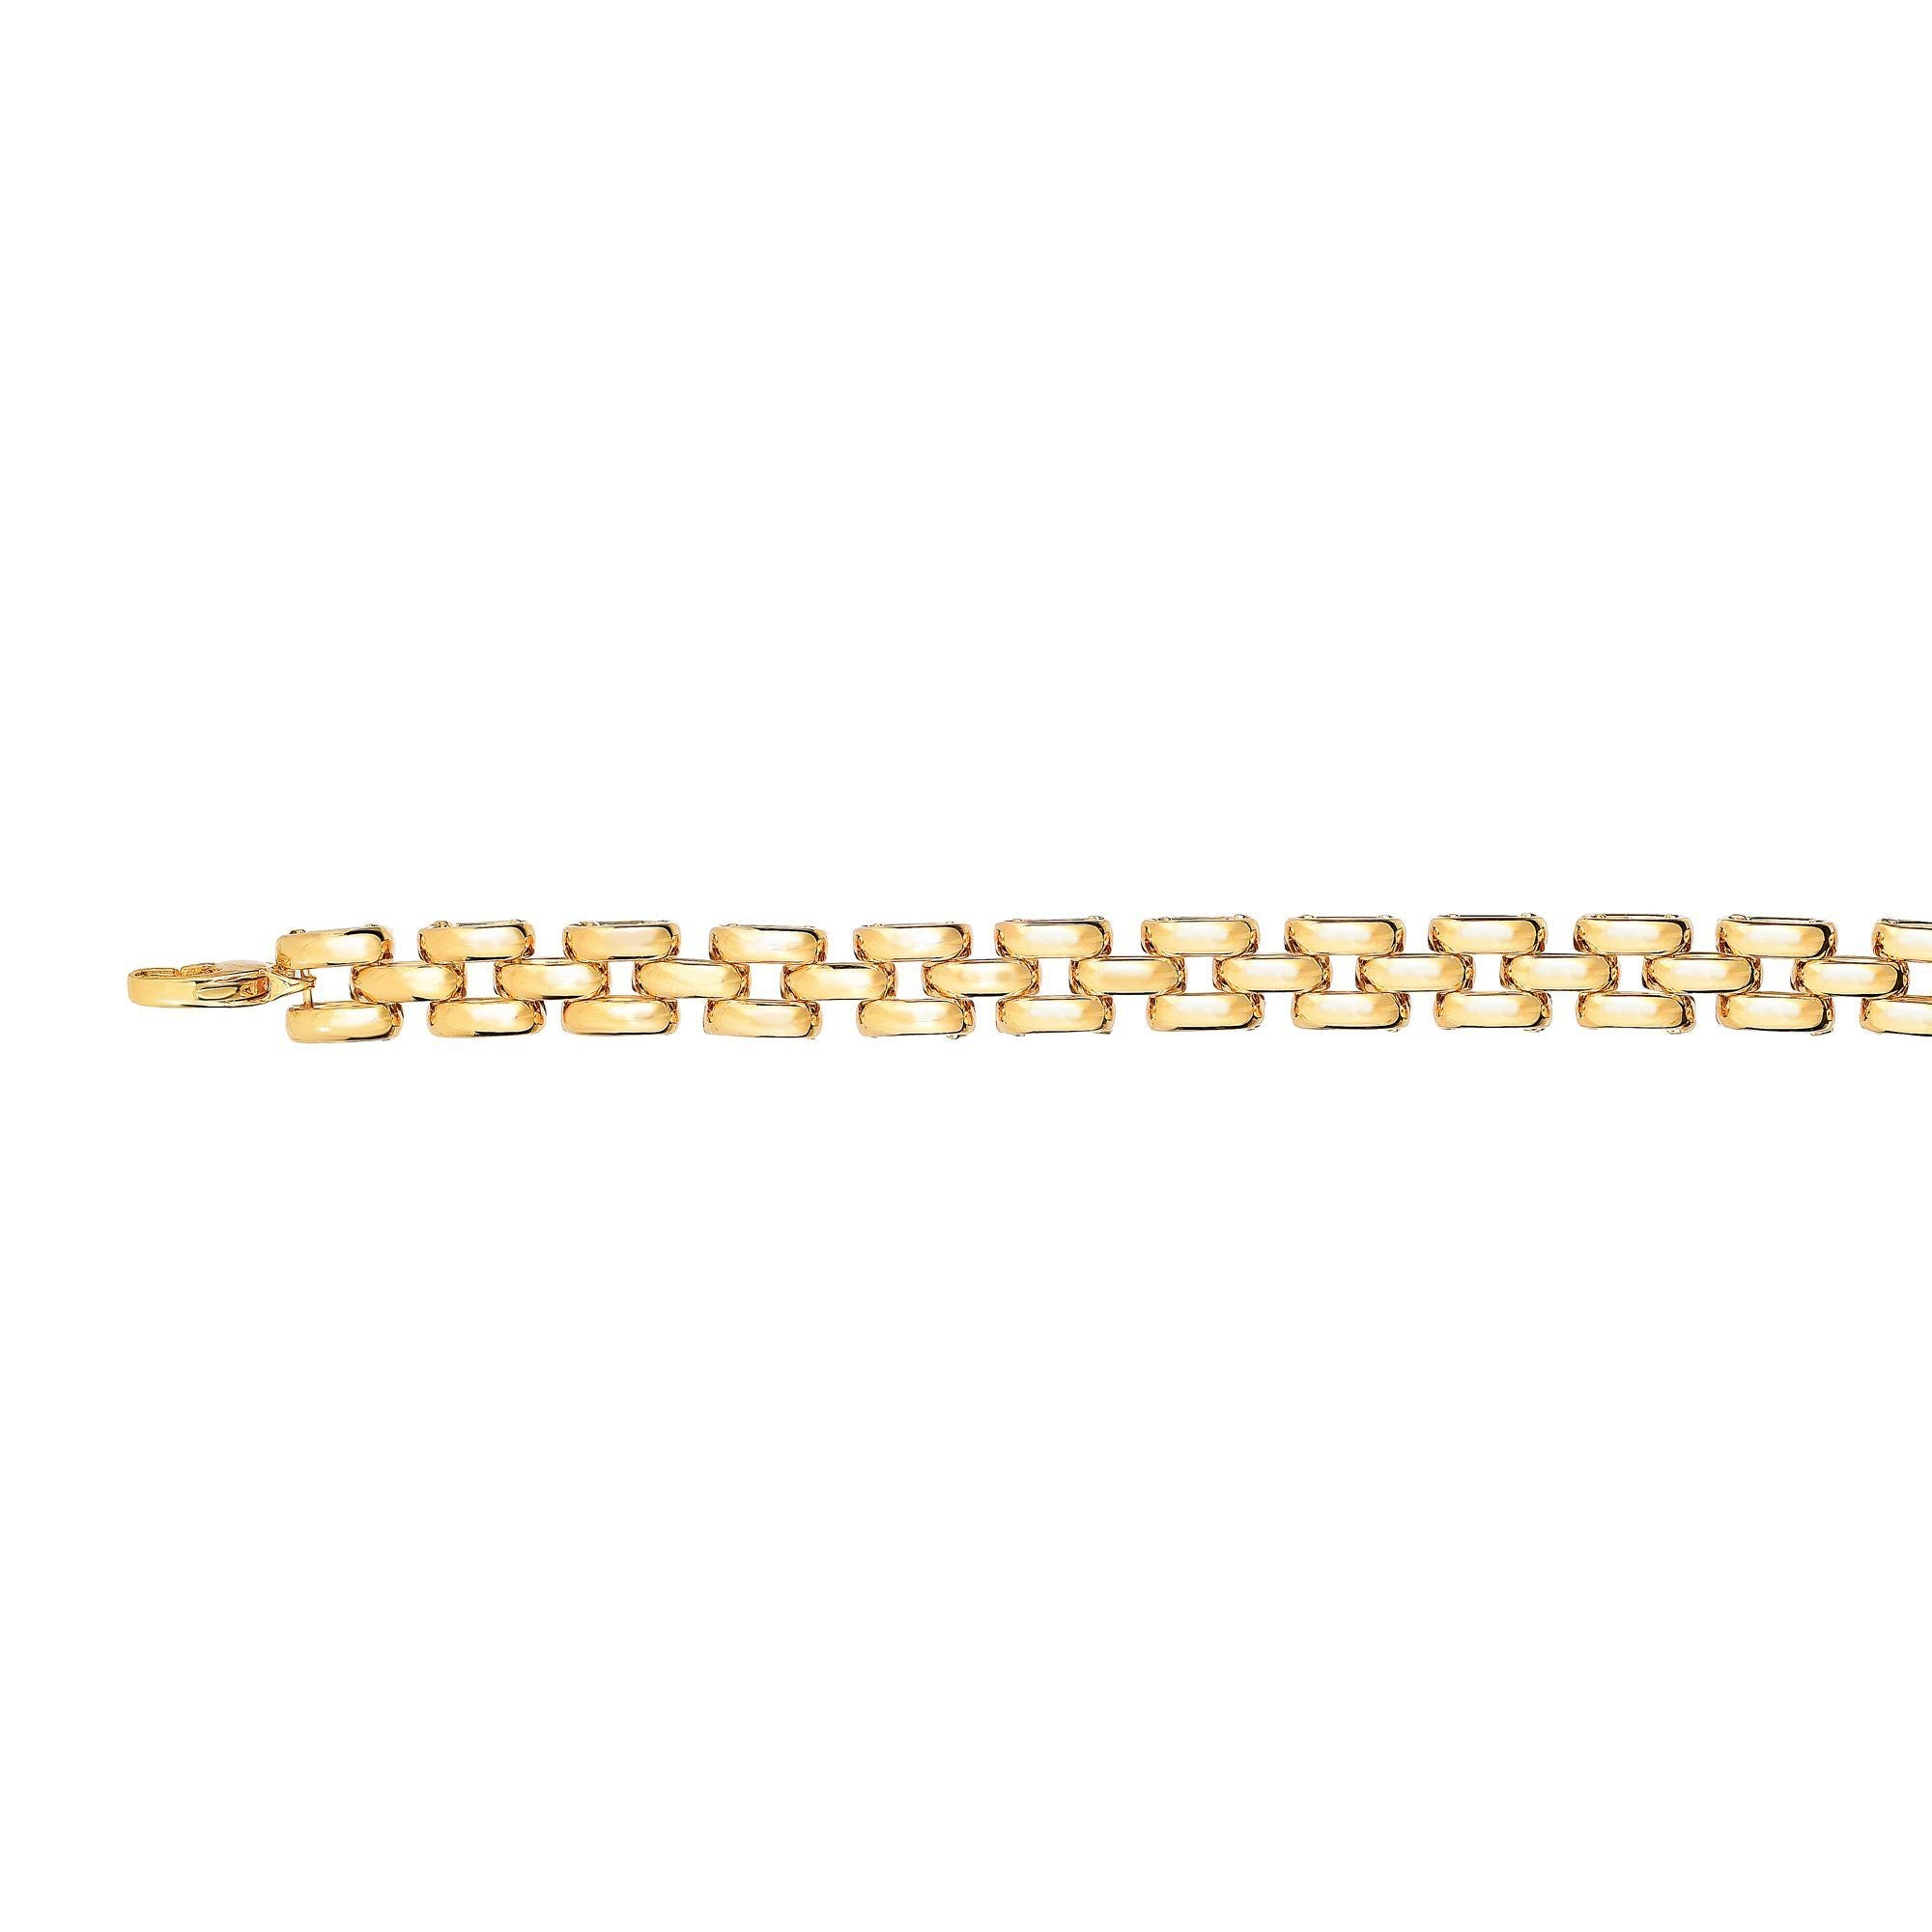 14k Yellow Gold 3 Row Panther Link Fancy Bracelet, 8"